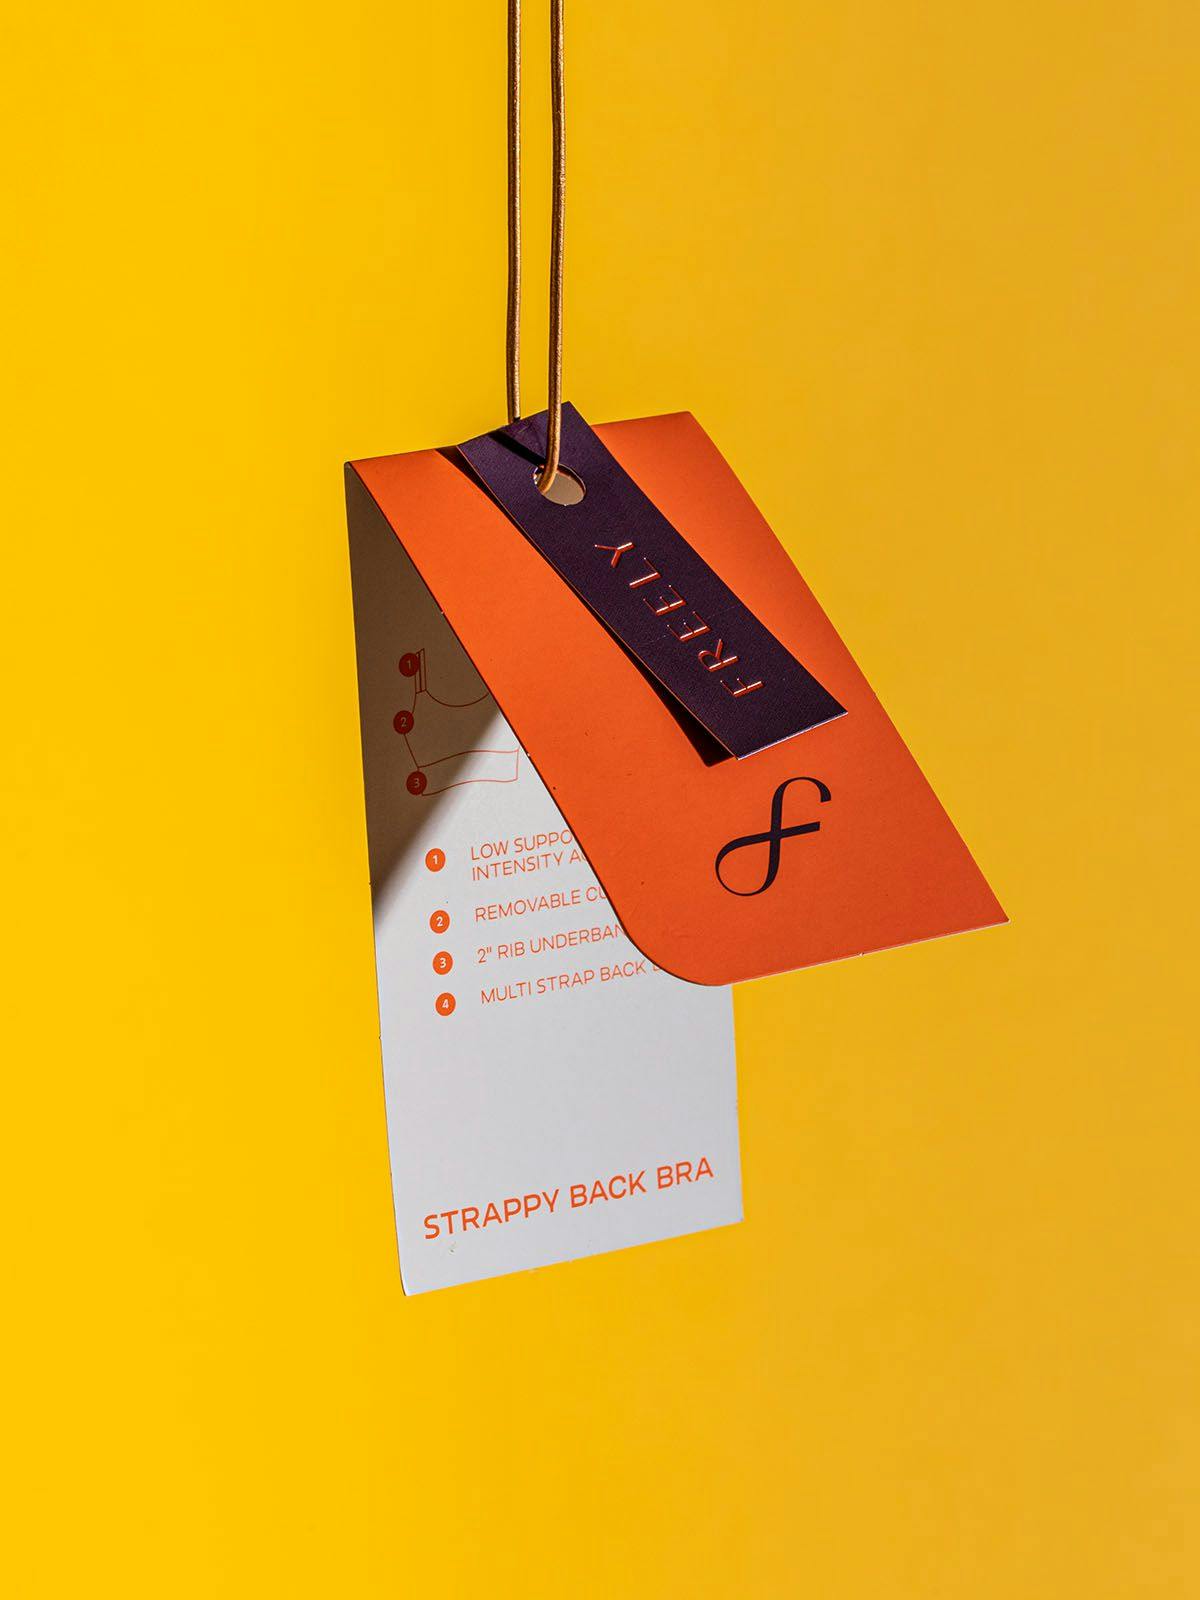 Freely's Product Tag Against a Mustard Yellow Background